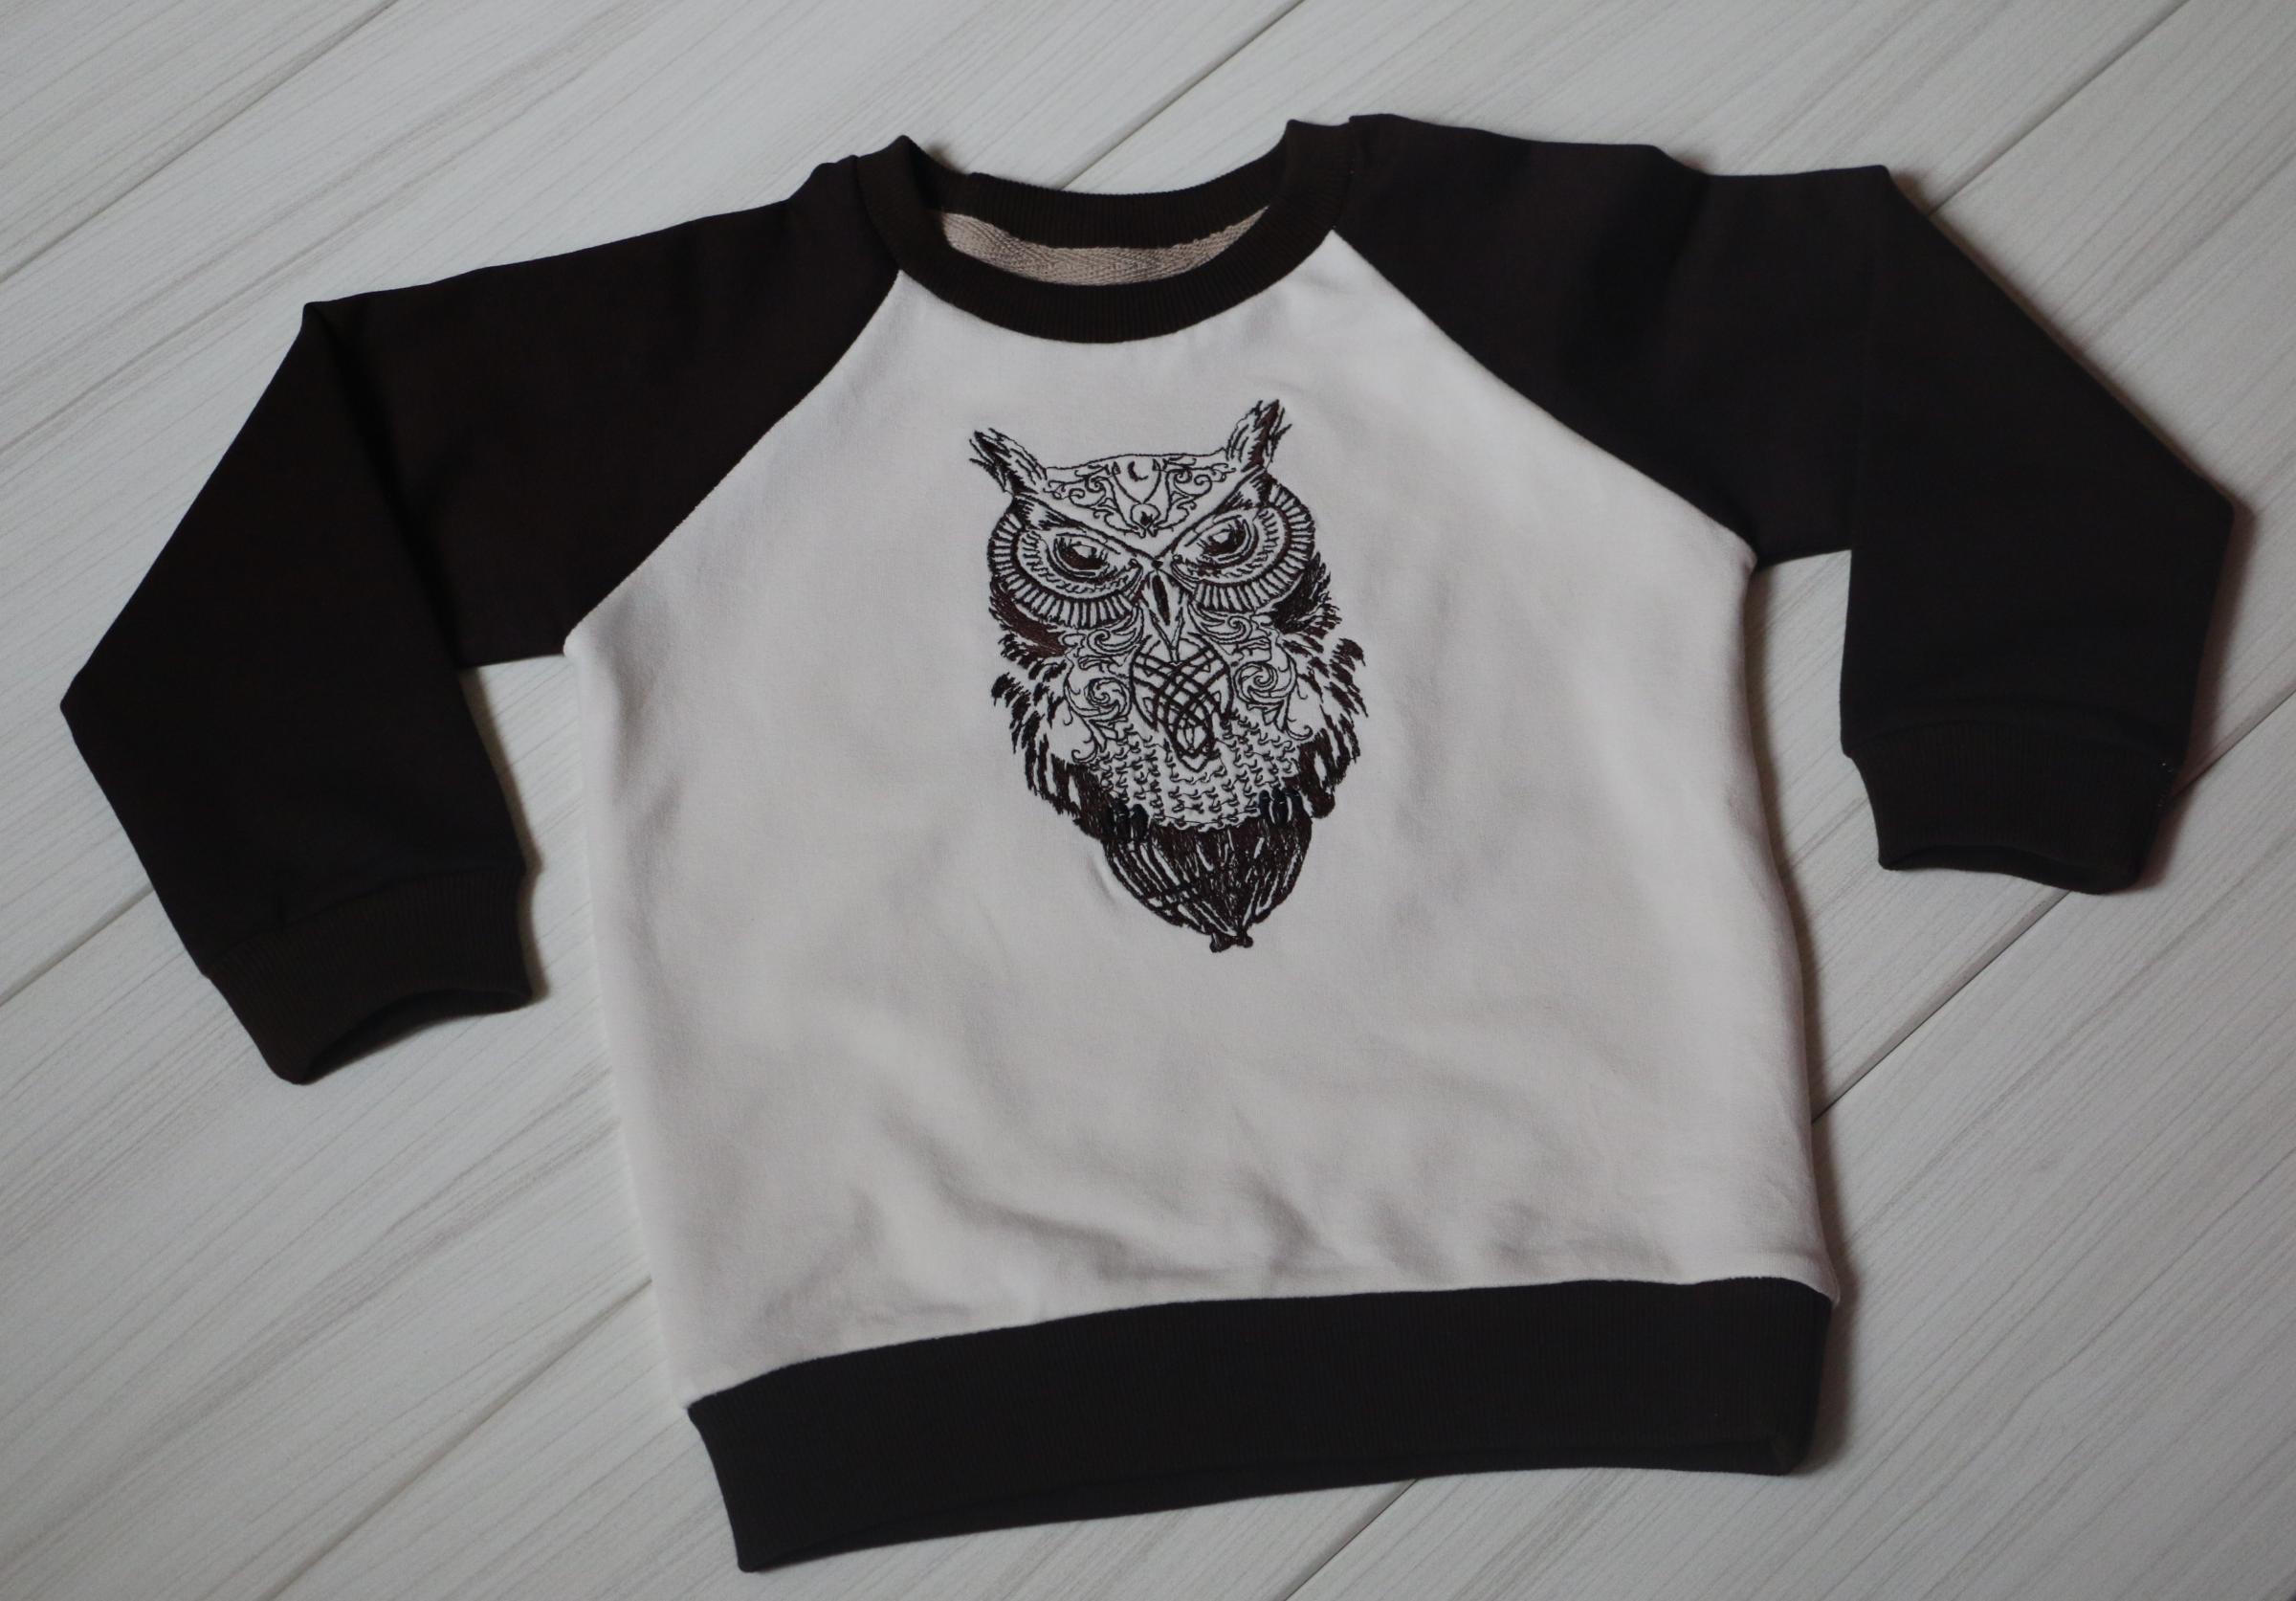 Sweater with Tribal owl embroidery design